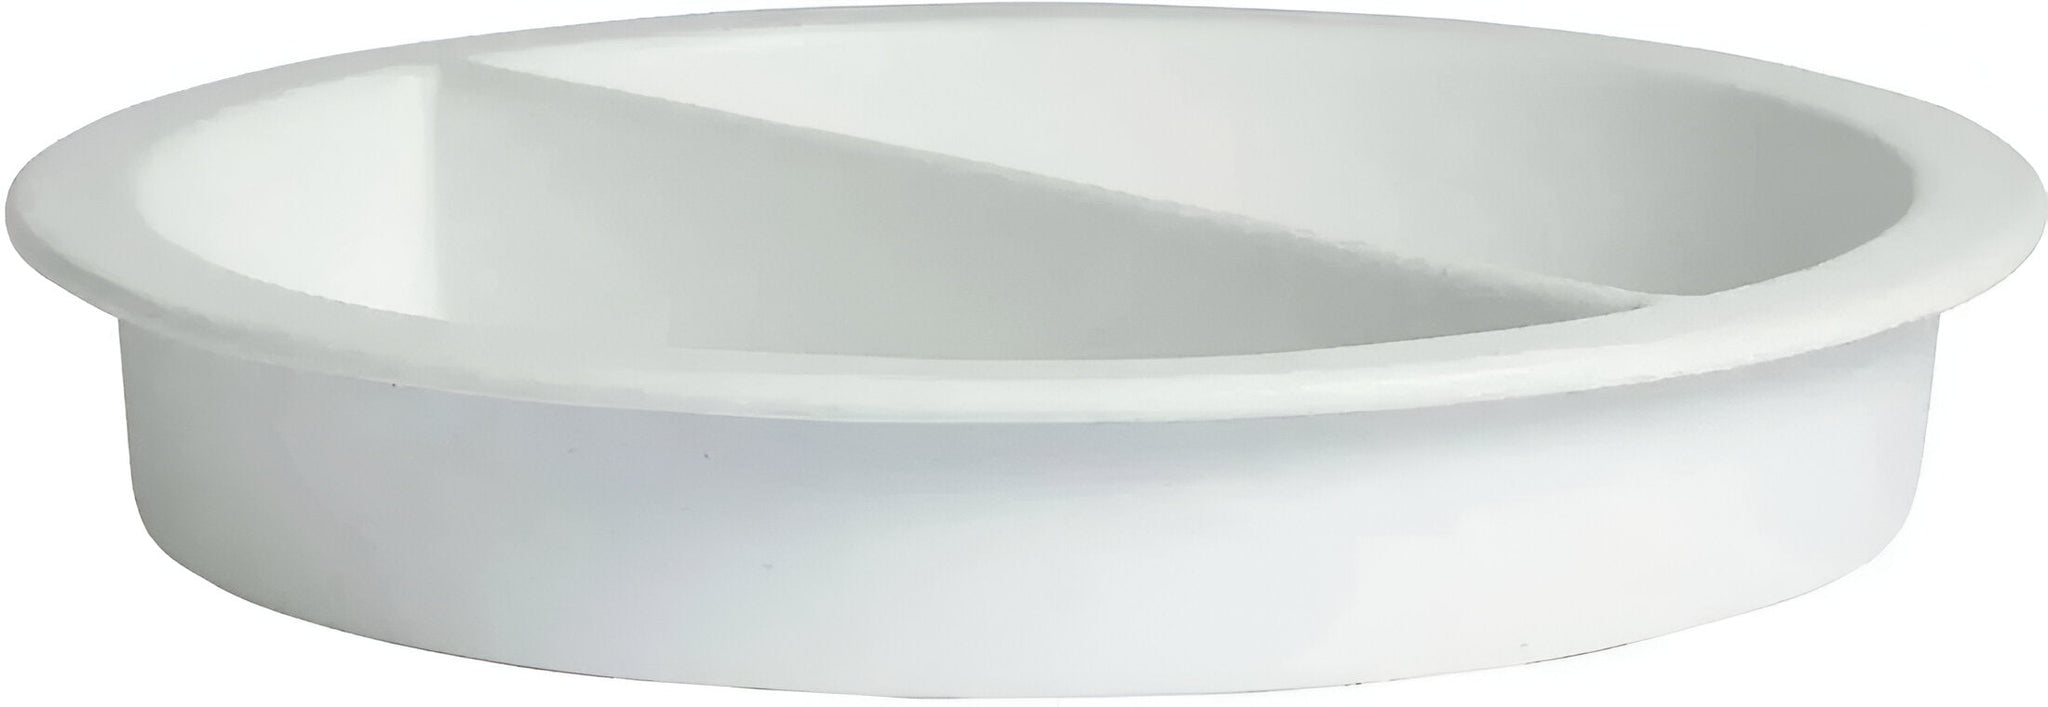 Bugambilia - Classic 5.2 Qt White Round Food Pan with Divider With Elegantly Textured - IR121WW